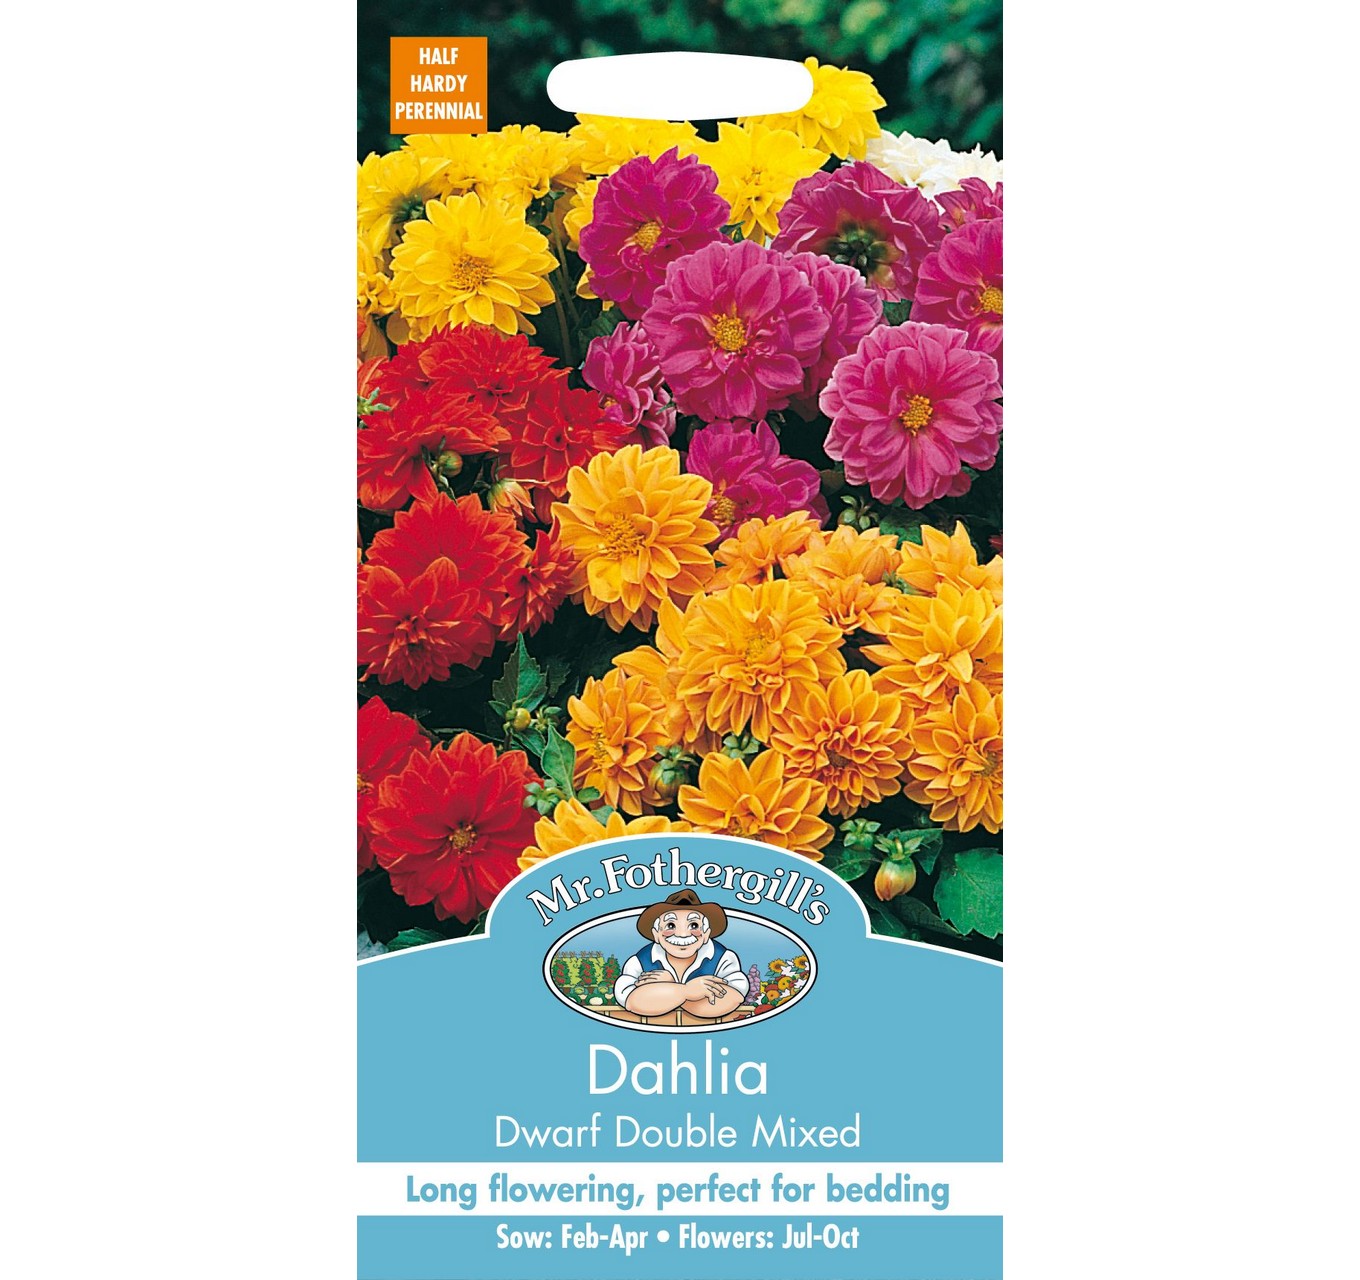 Dahlia Dwarf Double Mixed - Mr. Fothergill's Seeds